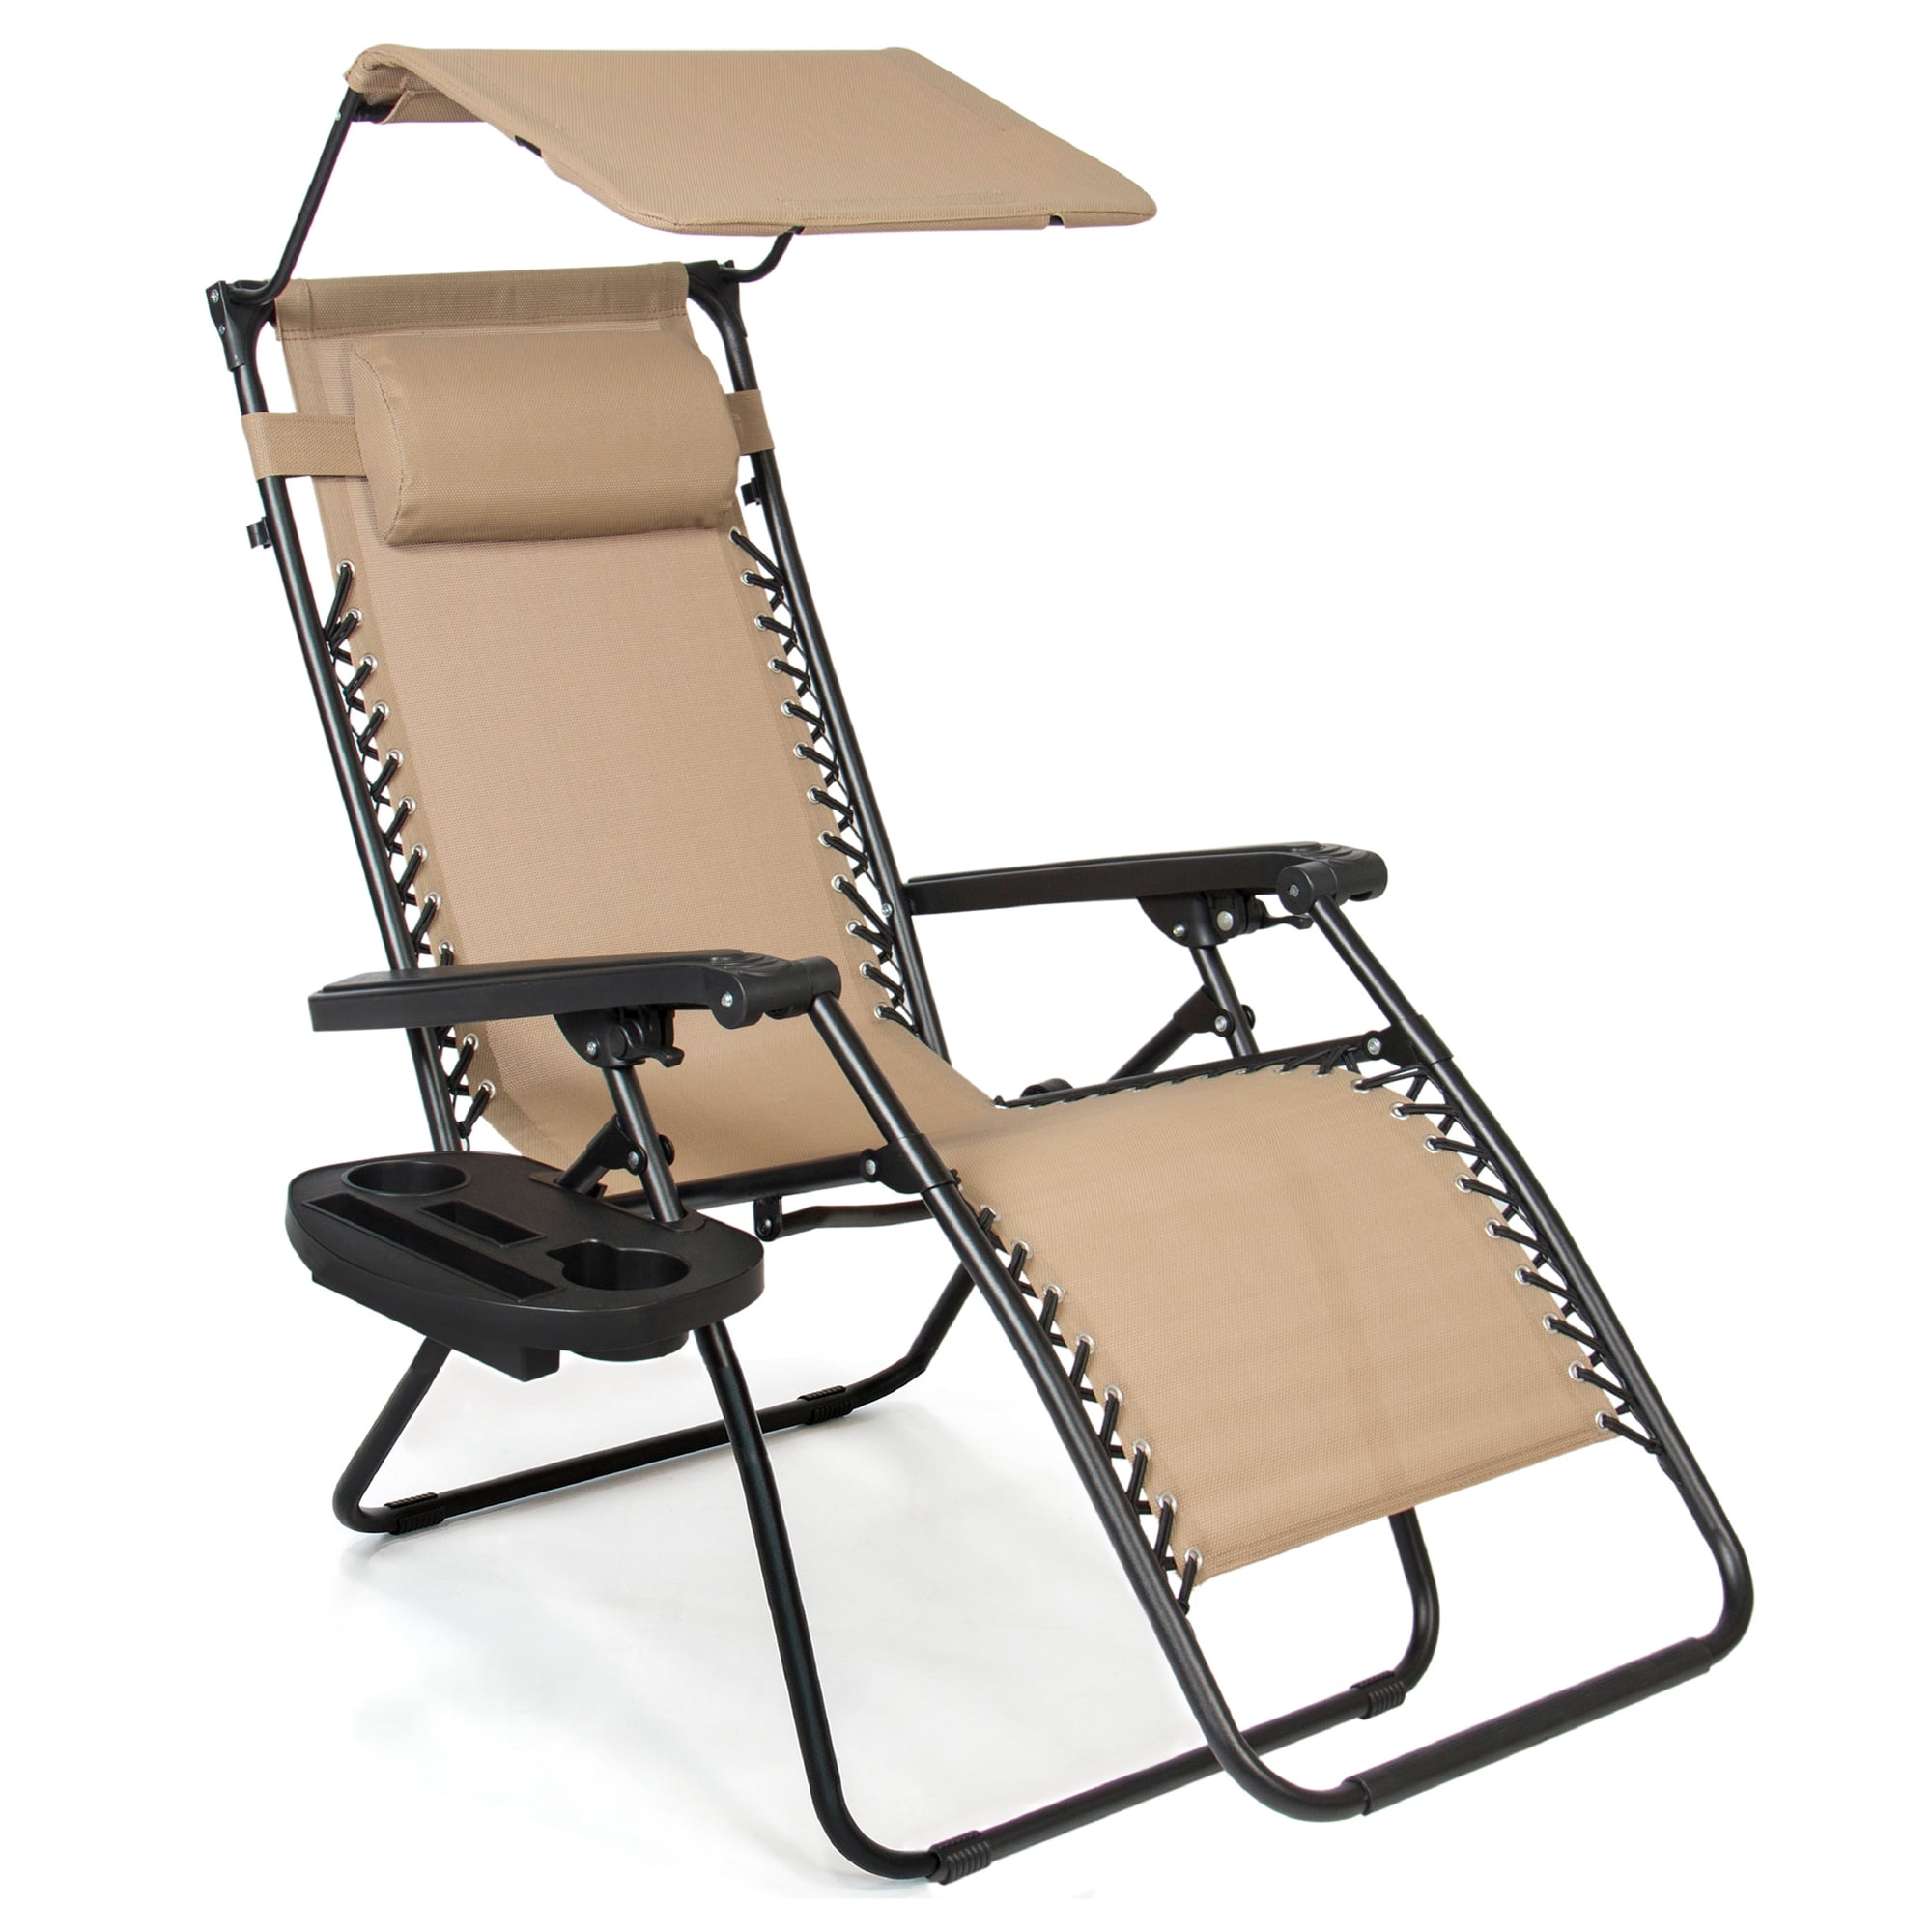 Portable Gravity Folding Beach/Chairs Outdoor Camping Recliner Tray Tools 